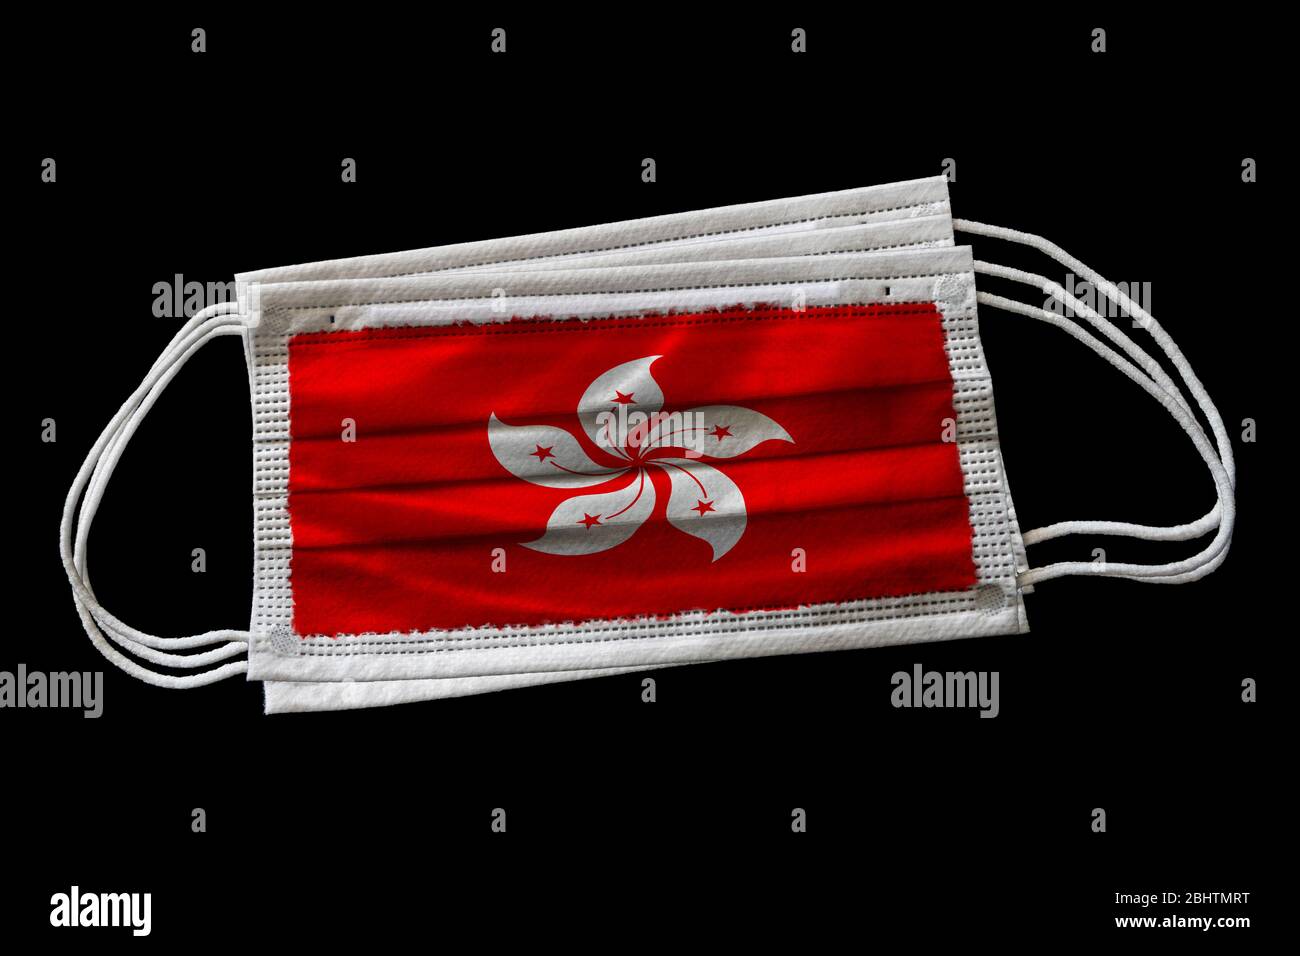 Surgical face masks with Hong Kong flag printed. Isolated on black background. Concept of face mask usage in Hong Kong SAR effort to combat Covid-19 c Stock Photo